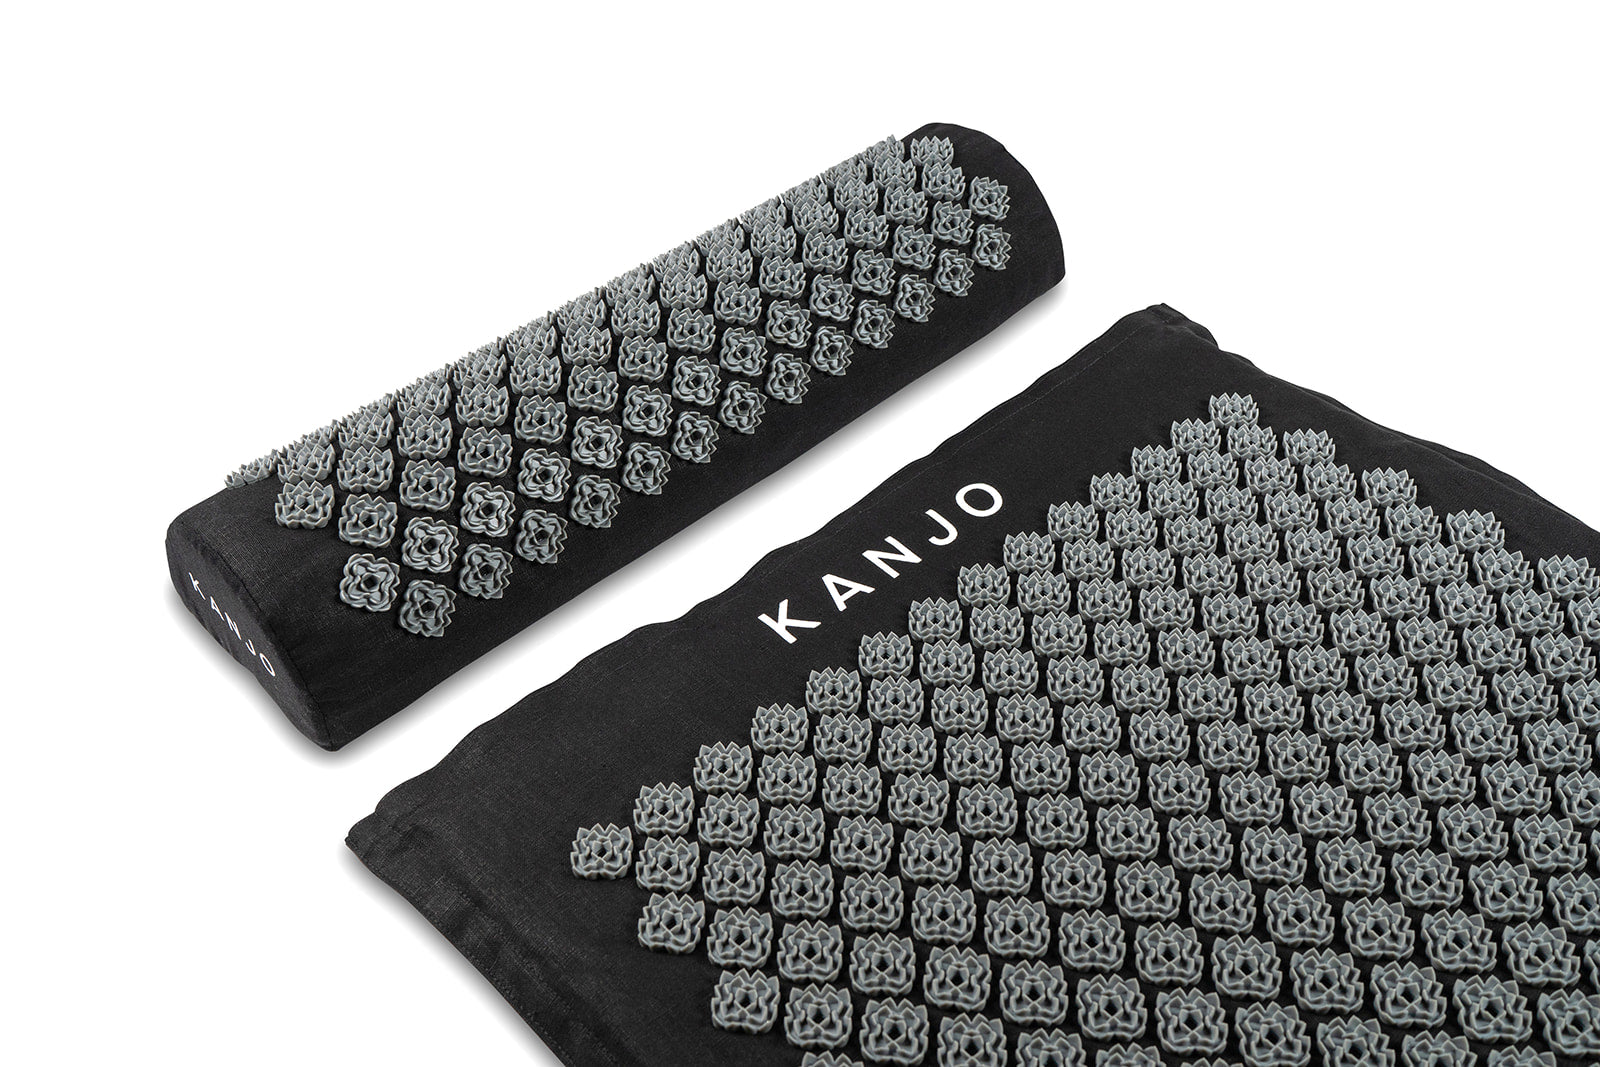 FSA HSA Eligible Kanjo Premium Acupressure Mat and Pillow Set for Back Pain  Relief & Neck Pain Relief, with Memory Foam Pillow, Includes Carry Bag